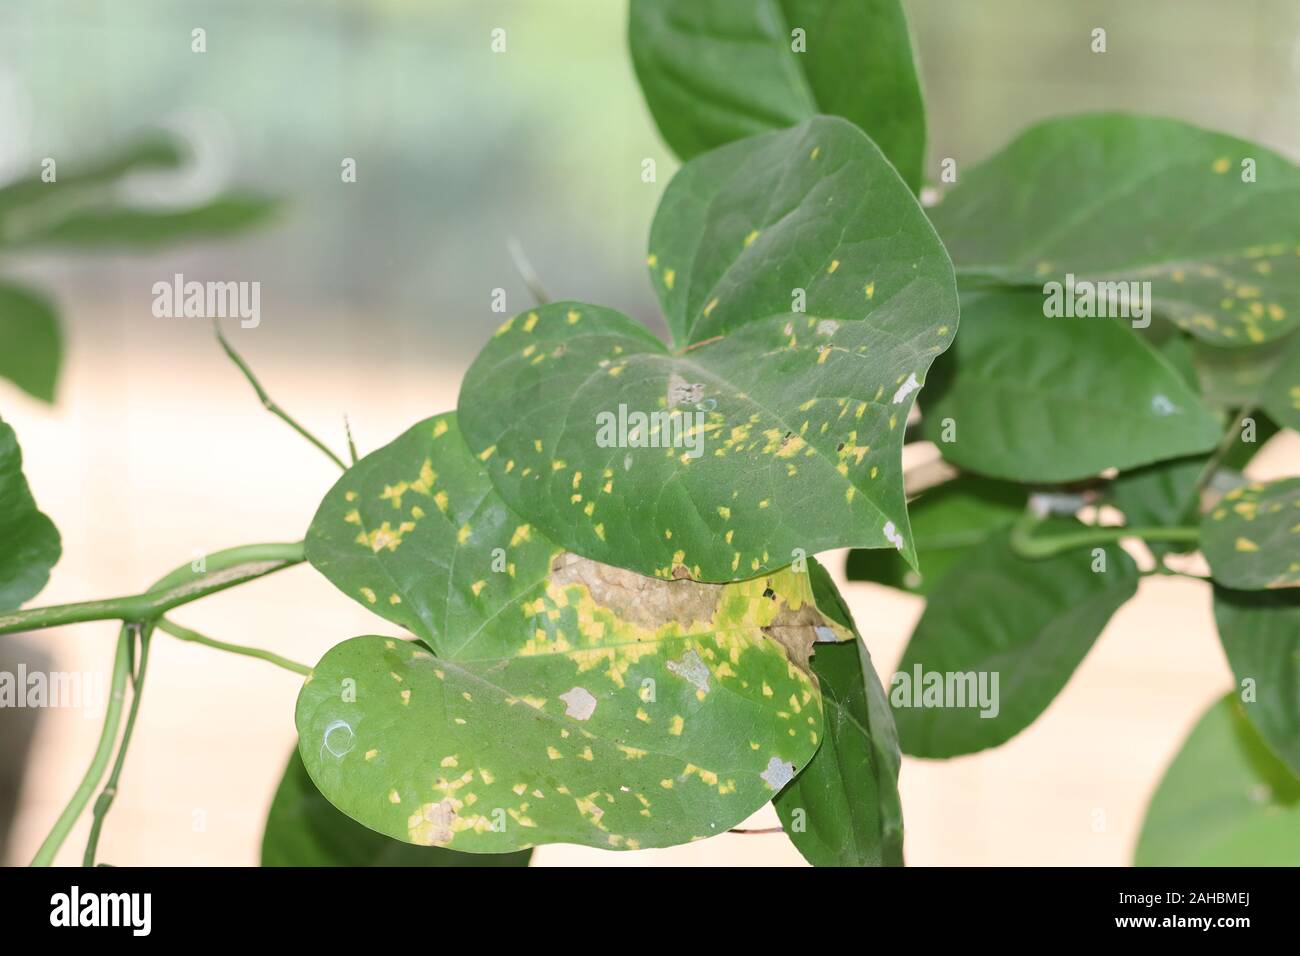 Fresh and ayurvedic giloy herbal leaves.Green leaf texture. Leaf texture background Stock Photo